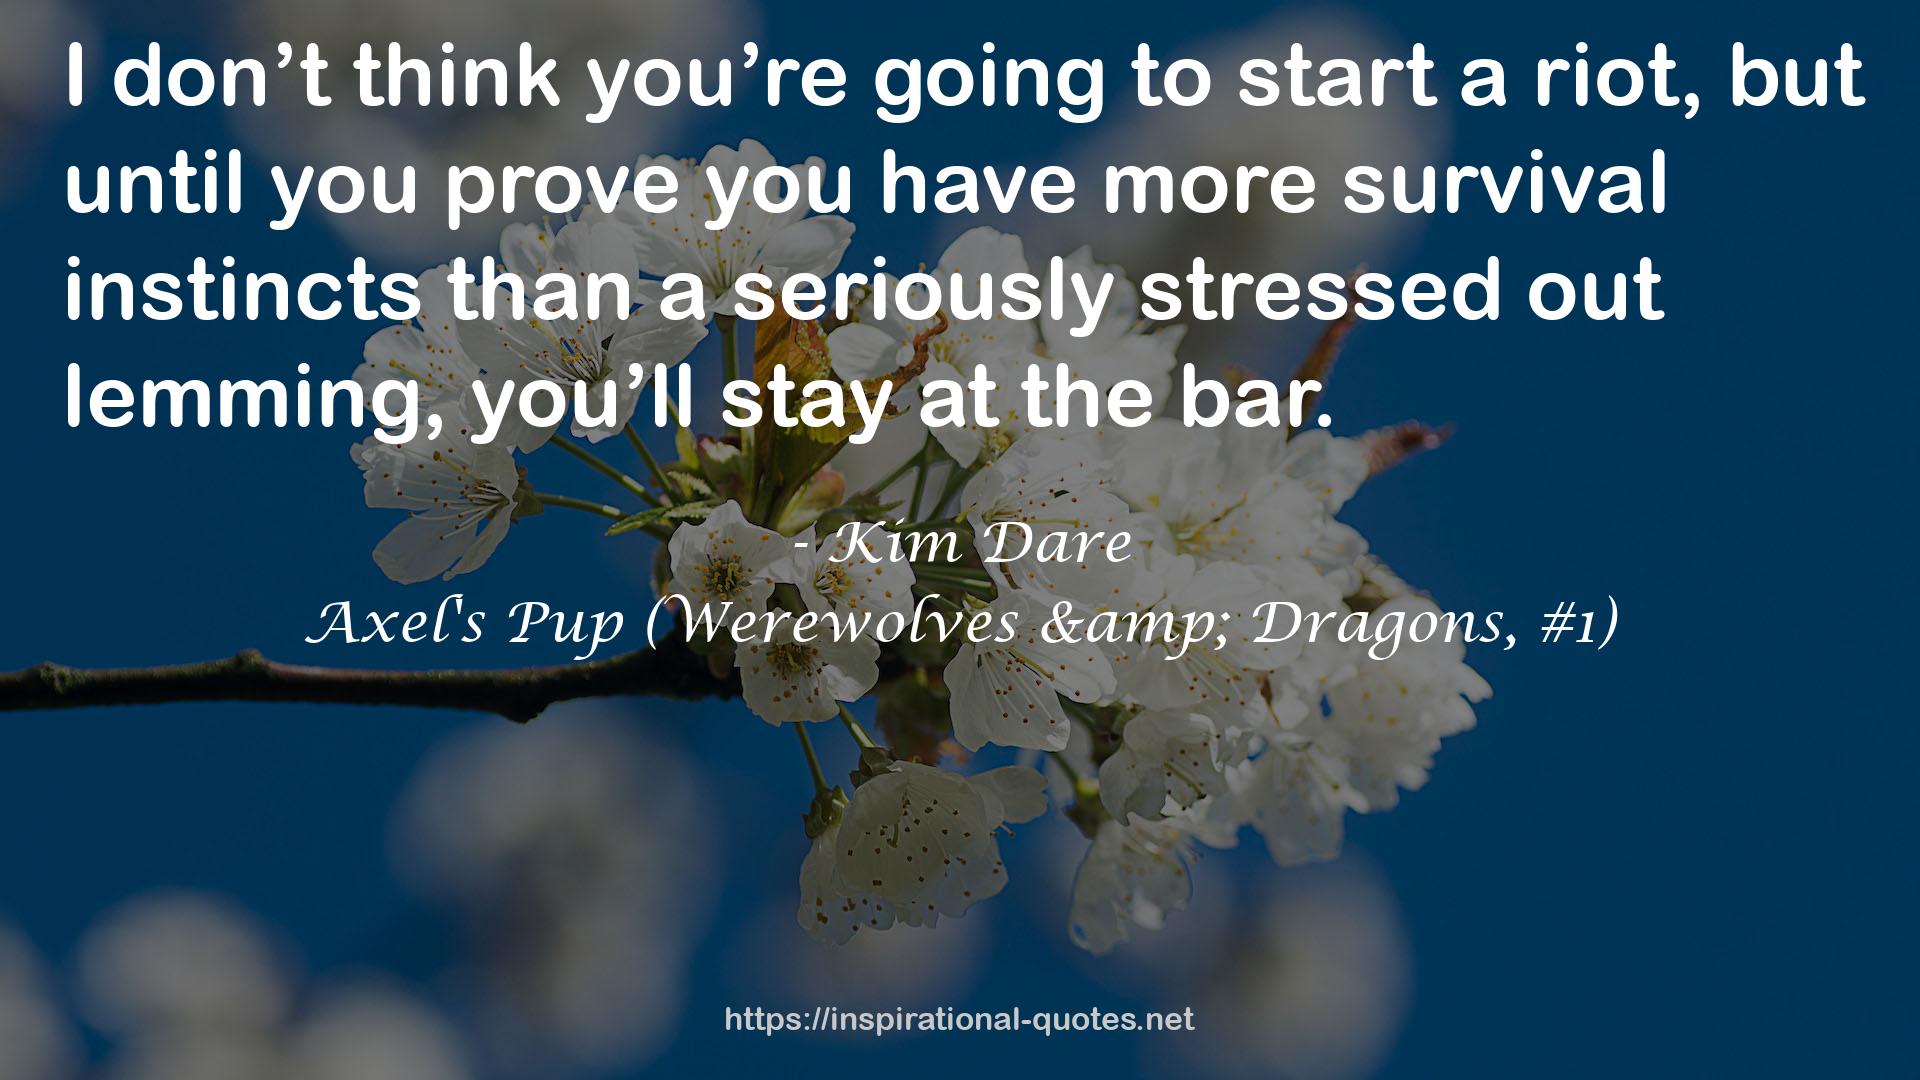 Axel's Pup (Werewolves & Dragons, #1) QUOTES